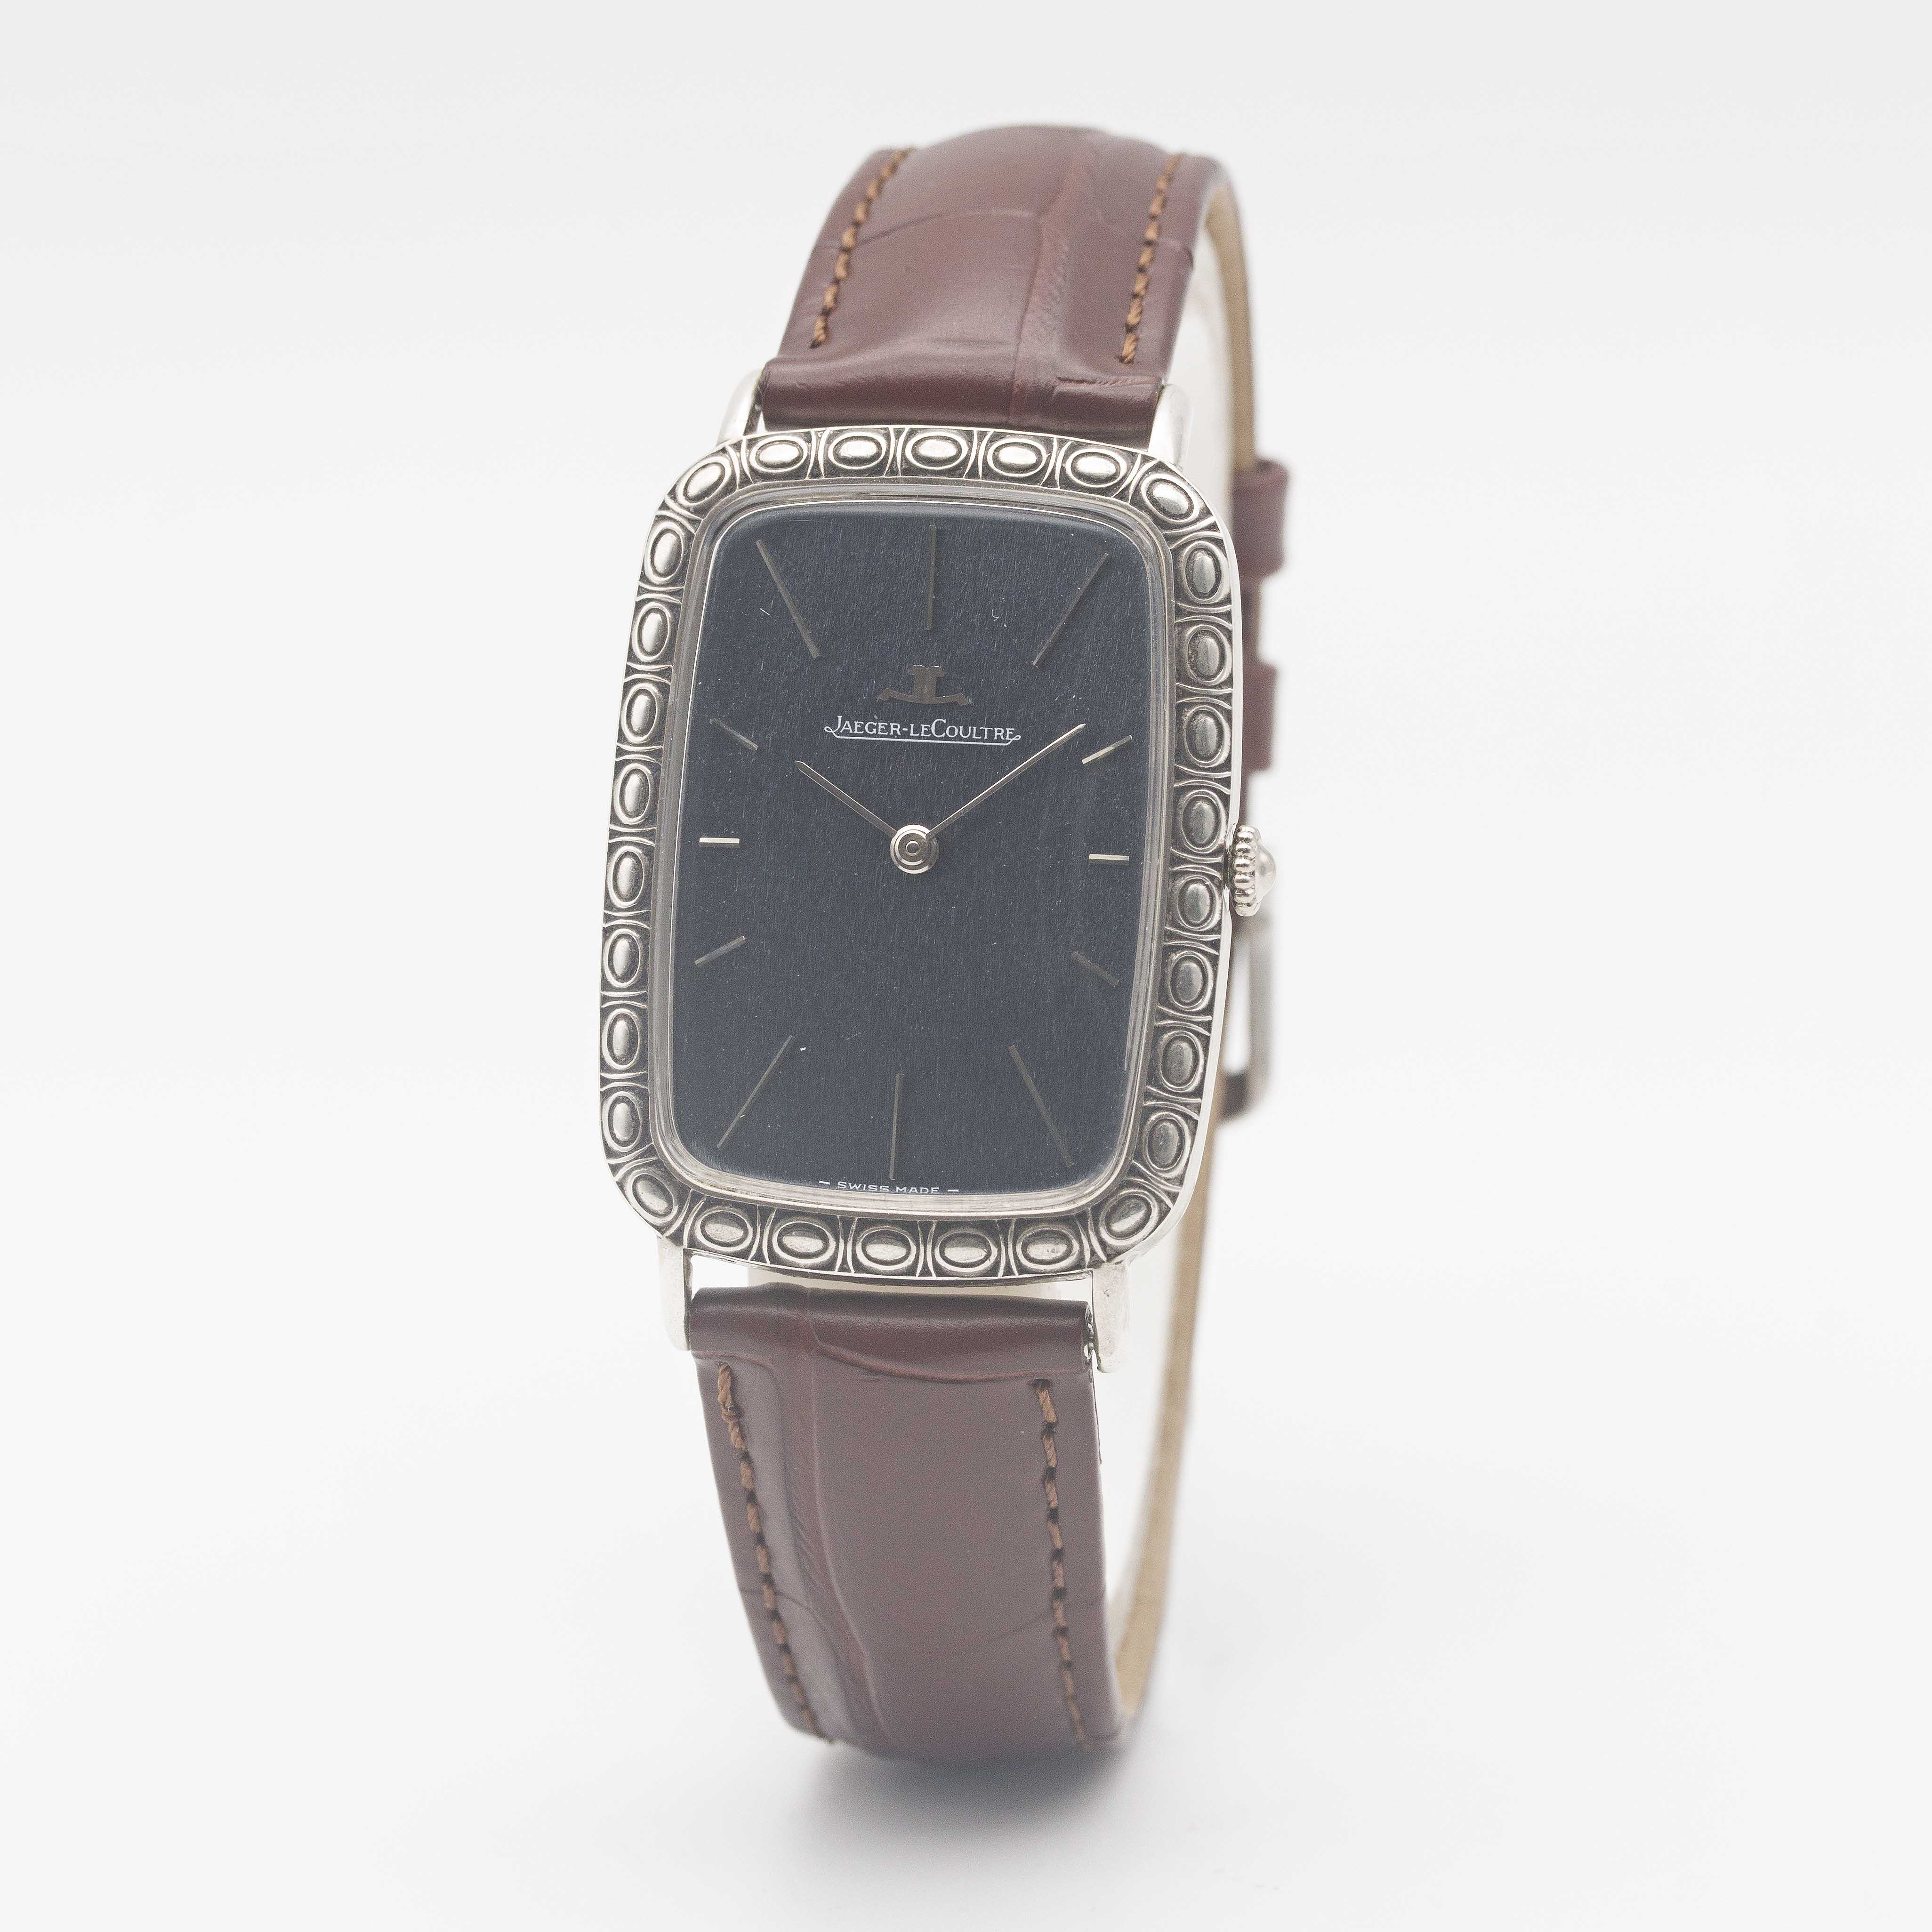 A GENTLEMAN'S SIZE SOLID SILVER JAEGER LECOULTRE RECTANGULAR WRIST WATCH CIRCA 1970s, REF. 9037 WITH - Image 4 of 10